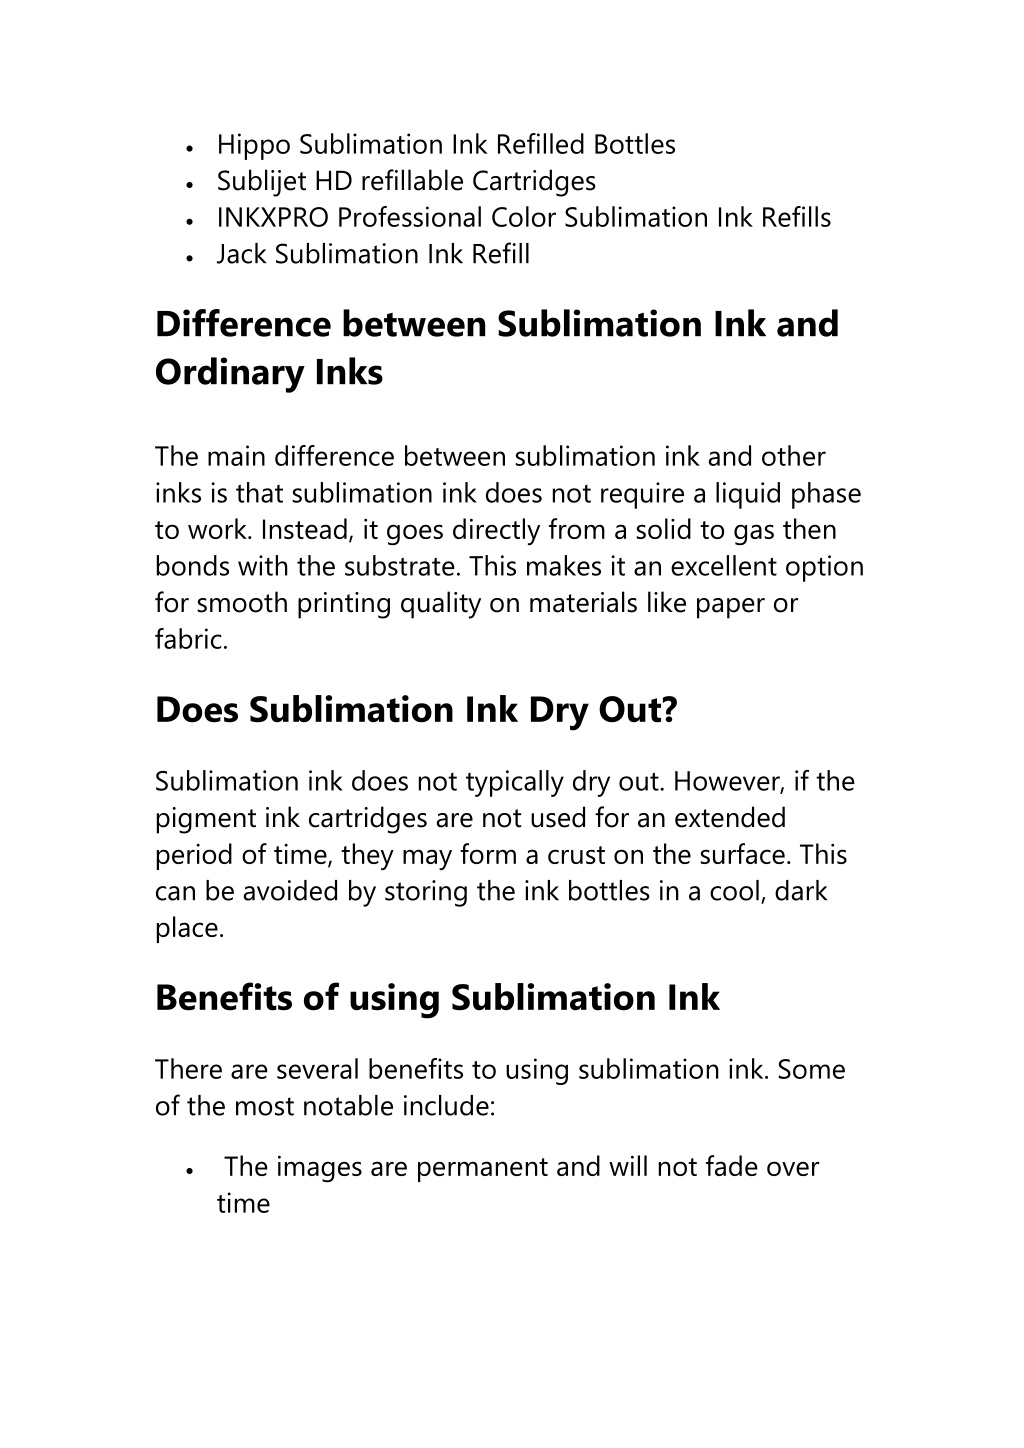 Ppt Best Sublimation Ink For Your Printer Buyers Guide Powerpoint Presentation Id11450870 7518